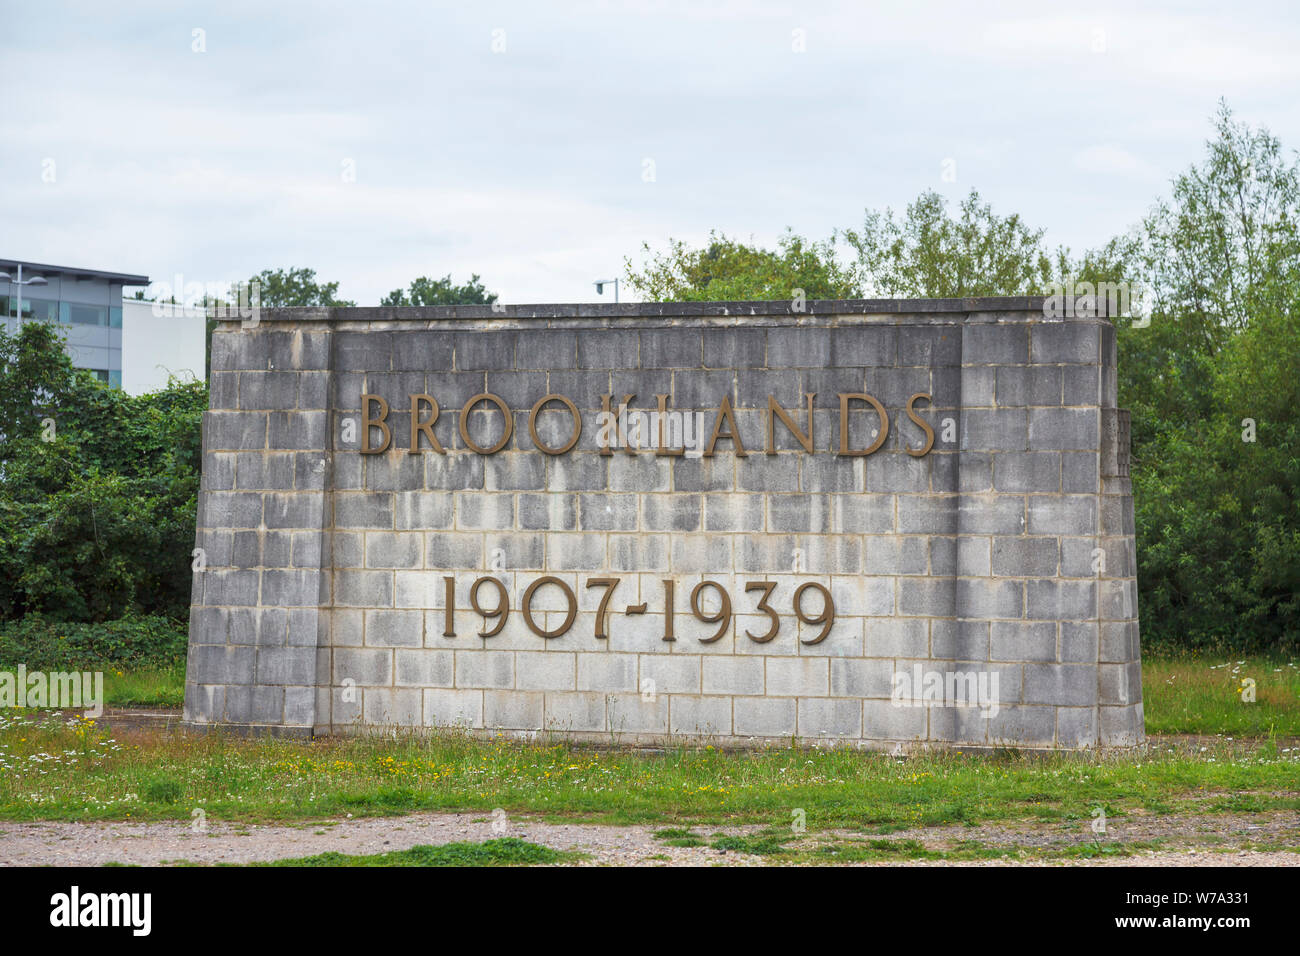 Memorial name sign at the site of the former Brooklands grand prix motor racing circuit 1907 - 1939, now part of the Brooklands Museum of Transport Stock Photo